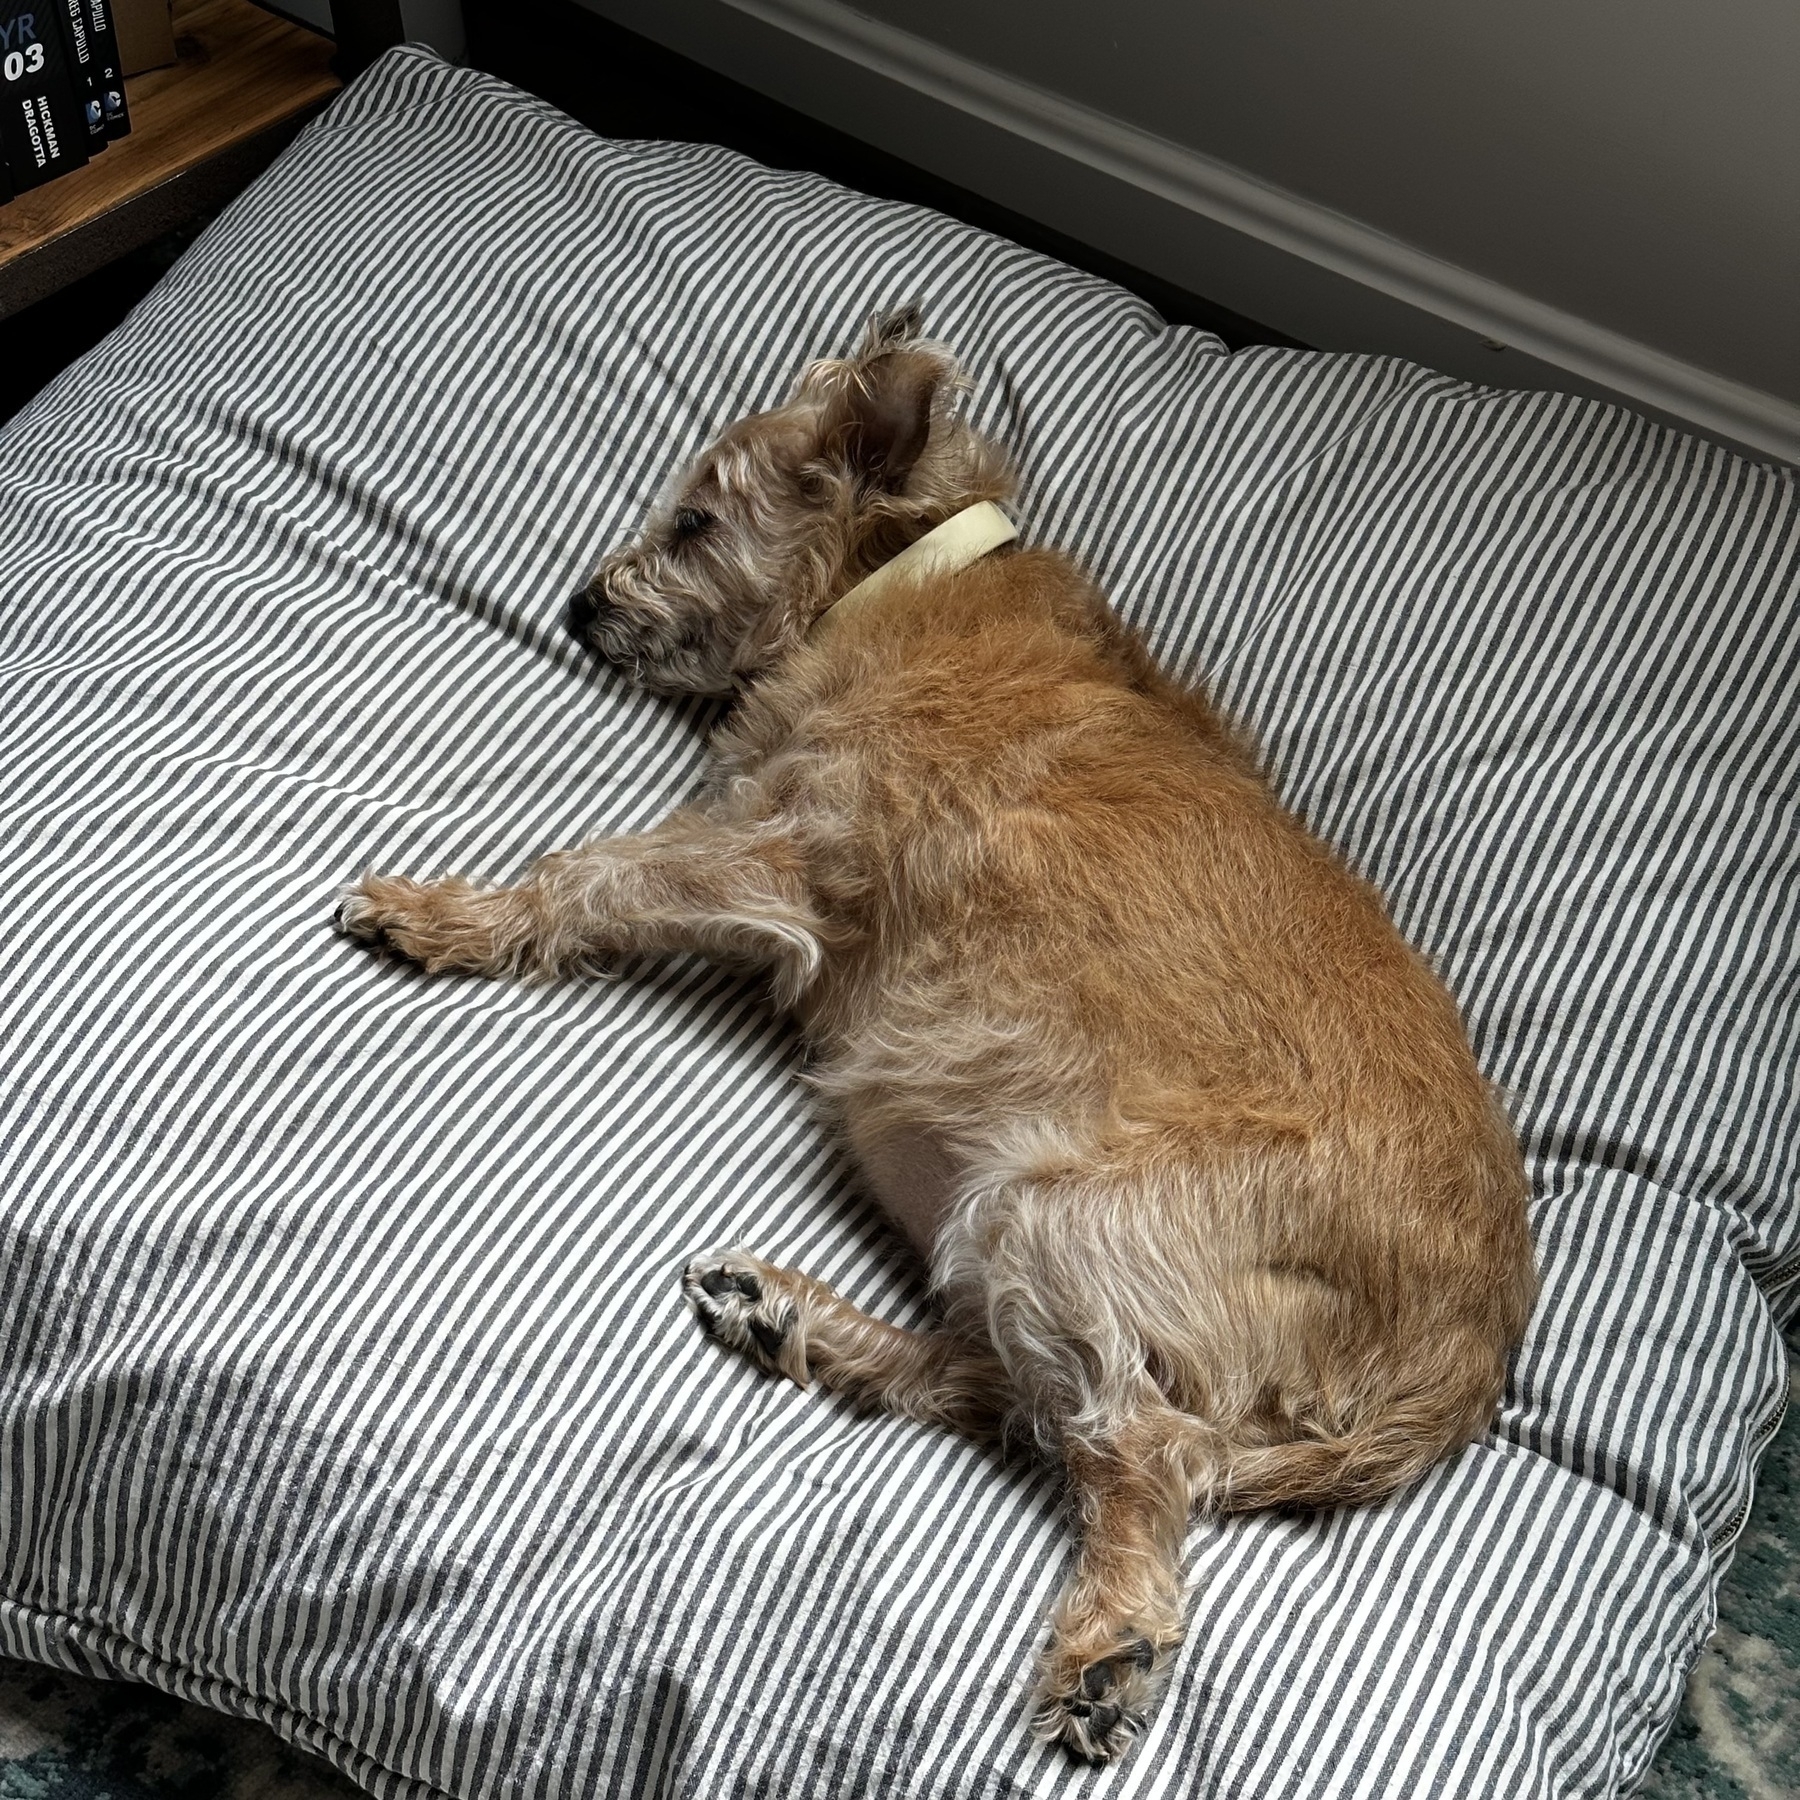 Brandy, a Cairn Terrier mix, sleeping on her side on a striped dog bed.